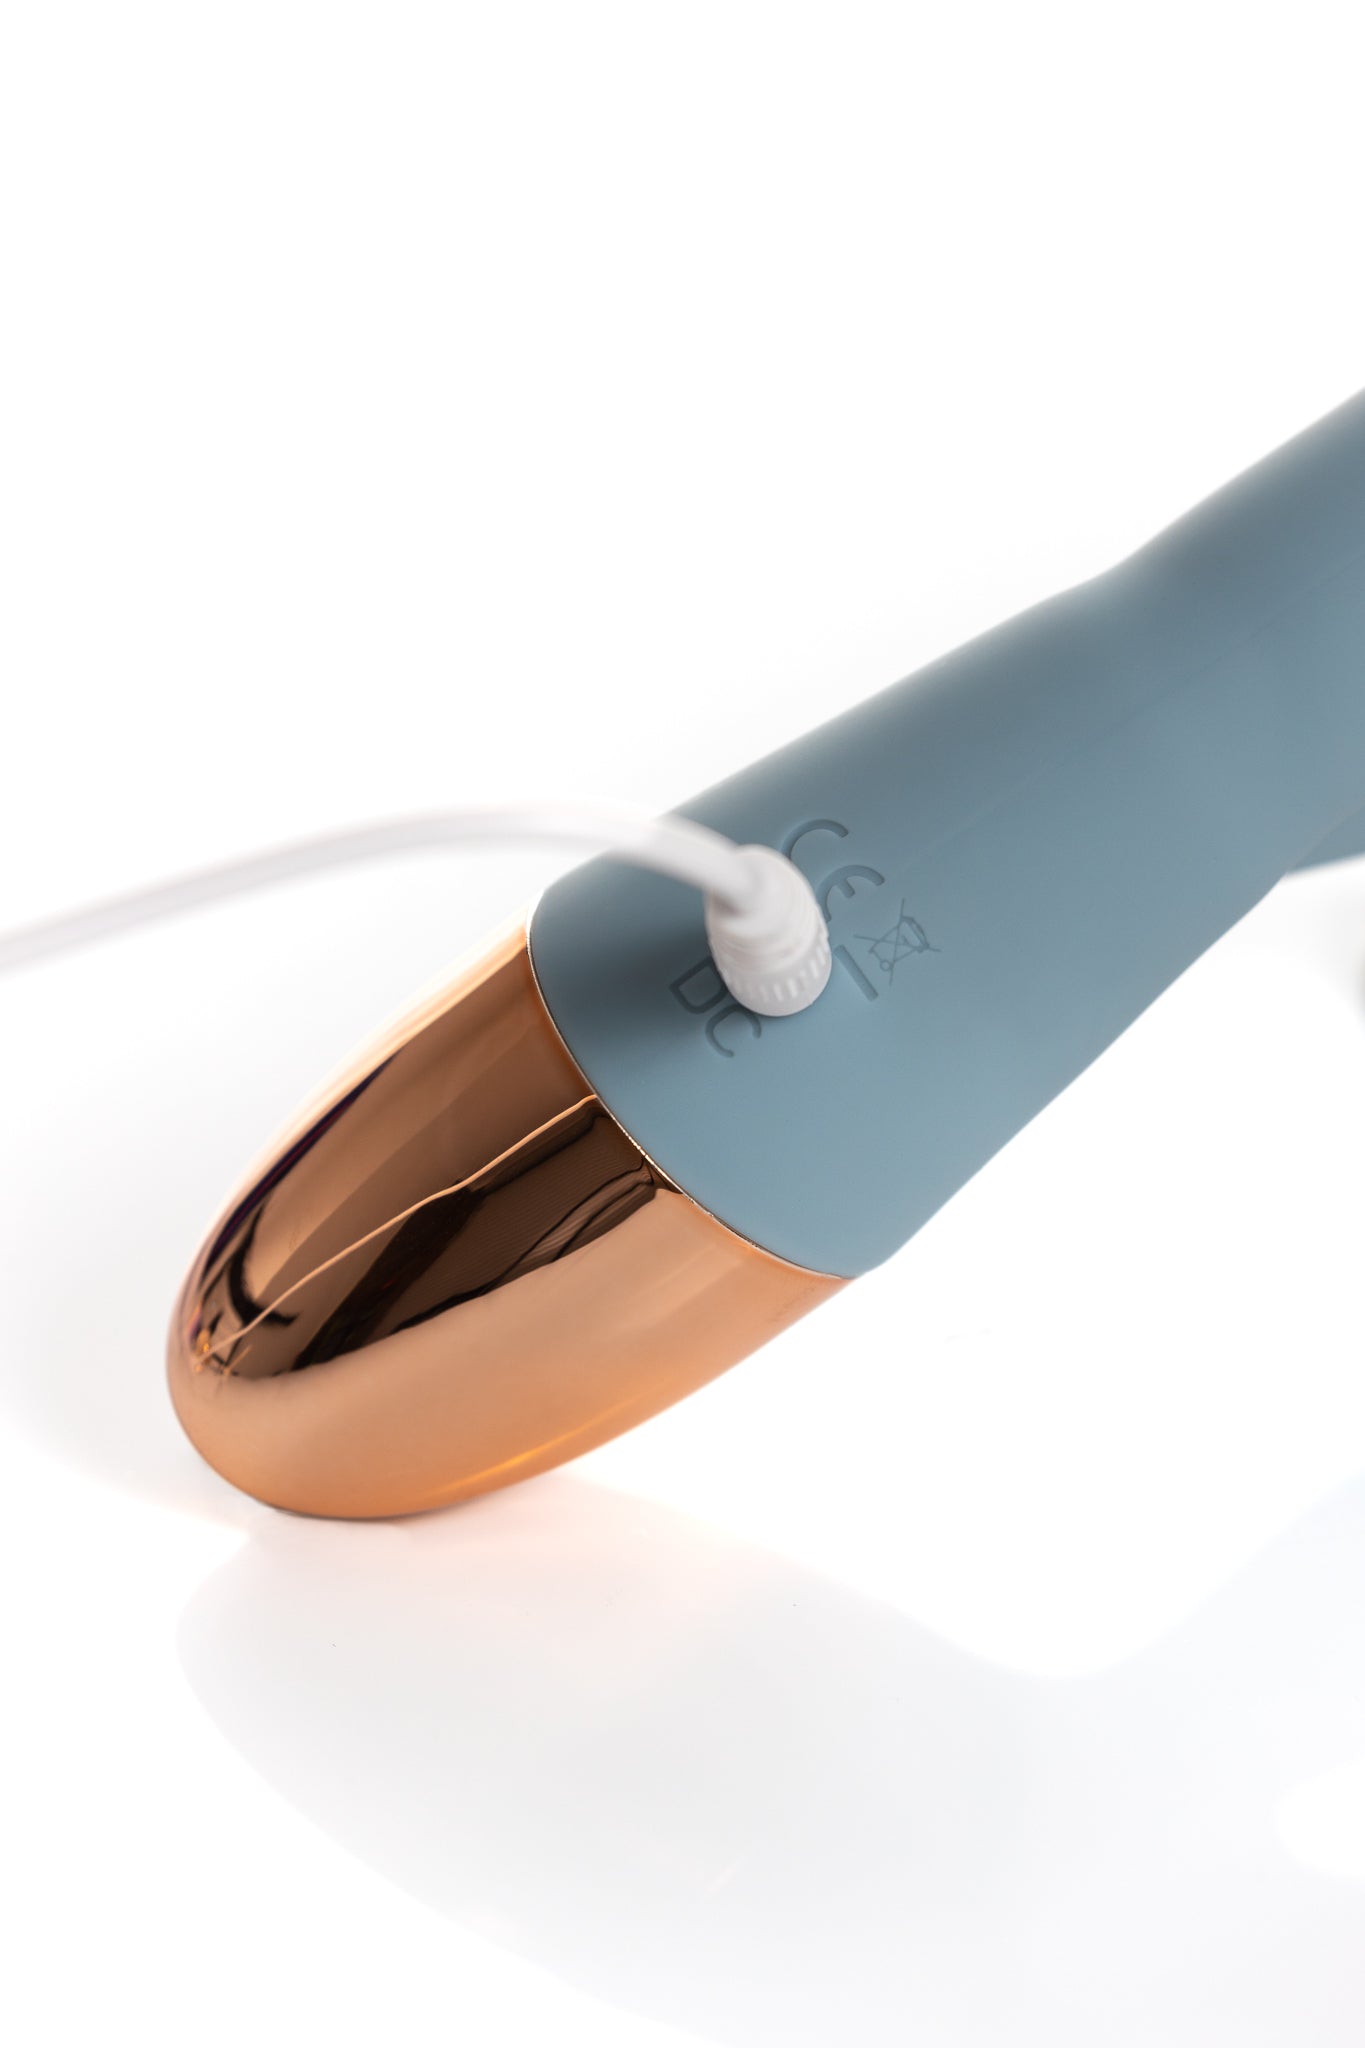 Eco-Friendly Bliss: USB Rechargeable, Waterproof Vibrator - Explore Every Setting